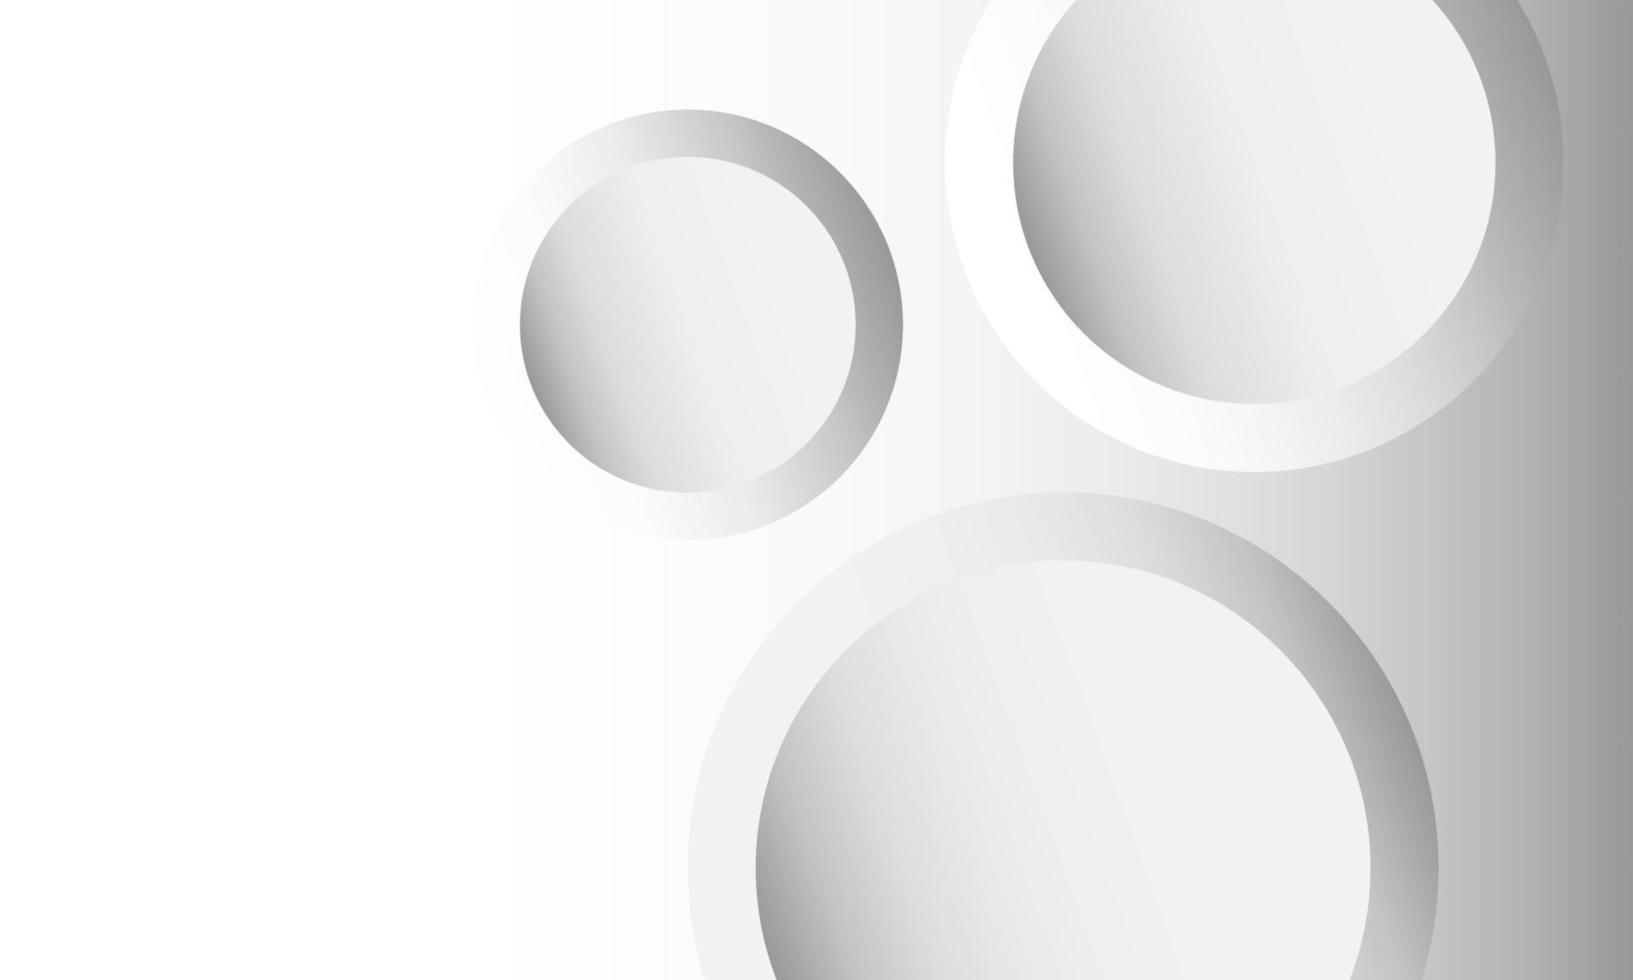 Abstract Vector Background Grayscale White Circles